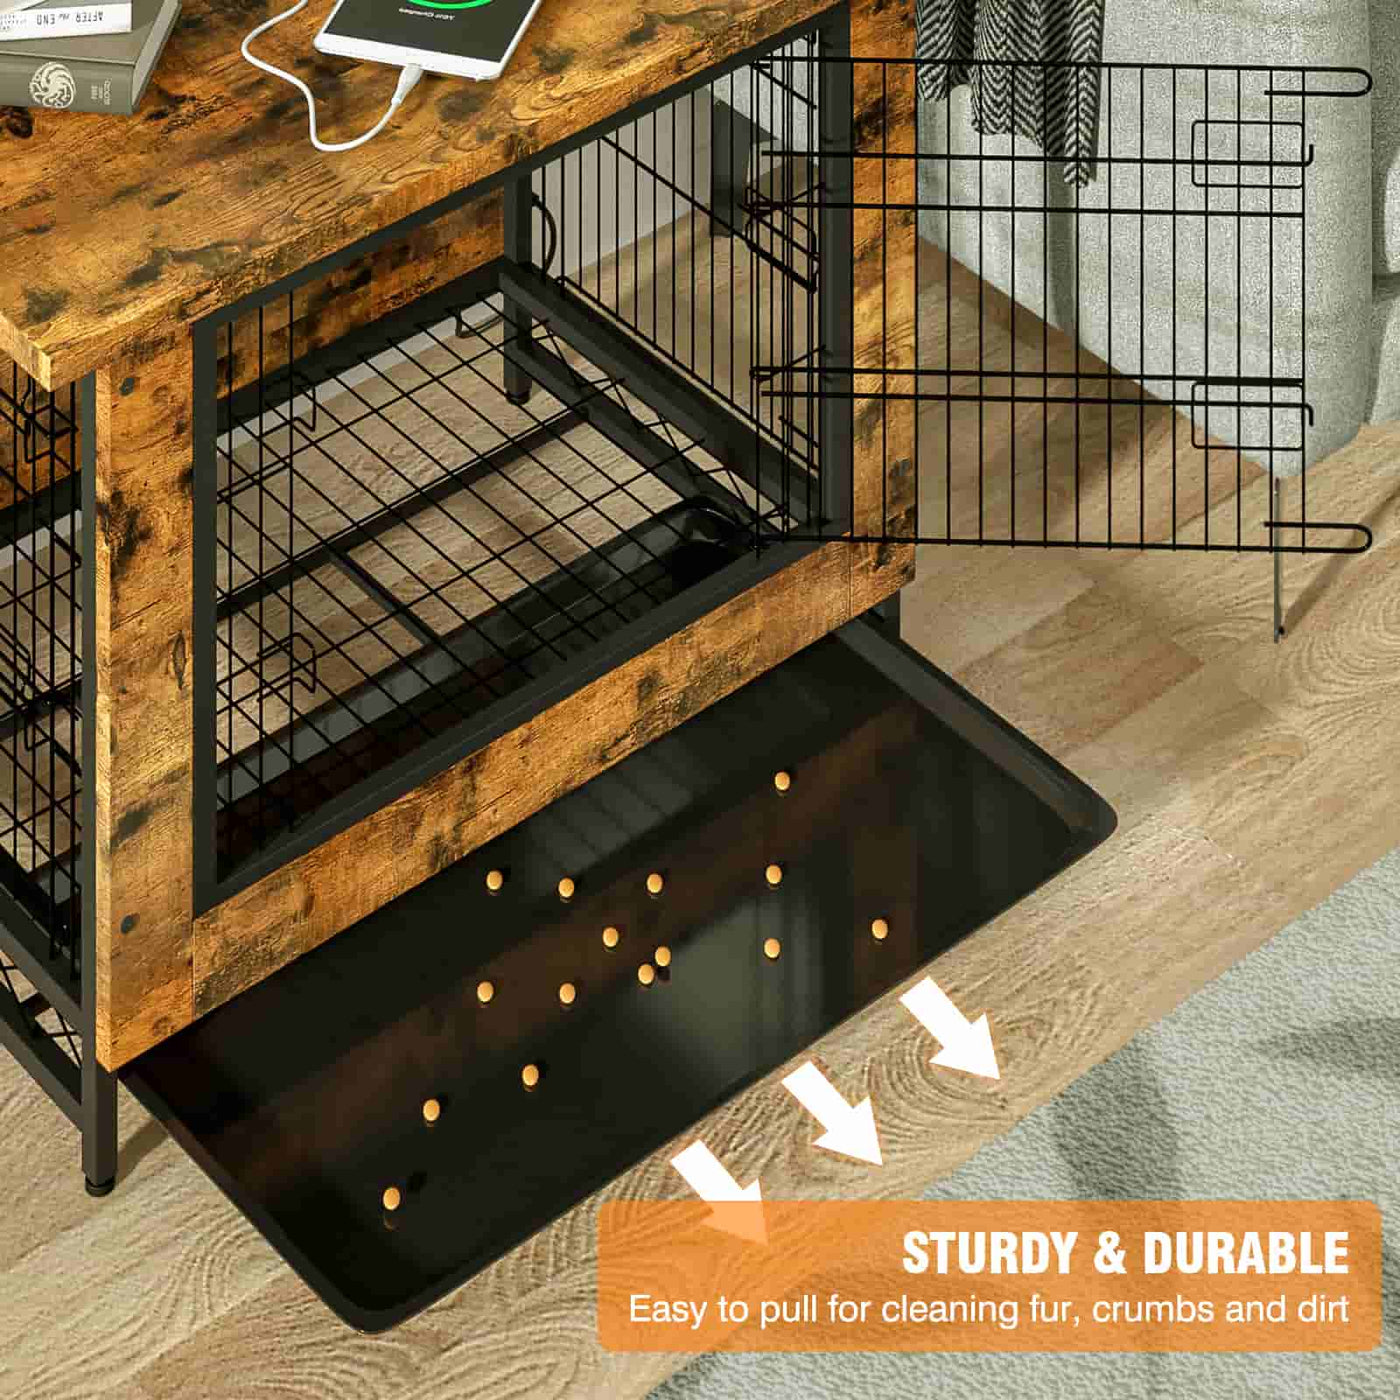 Wasagun Dog Crate Furniture, for Small Dogs, Wood Dog Crate